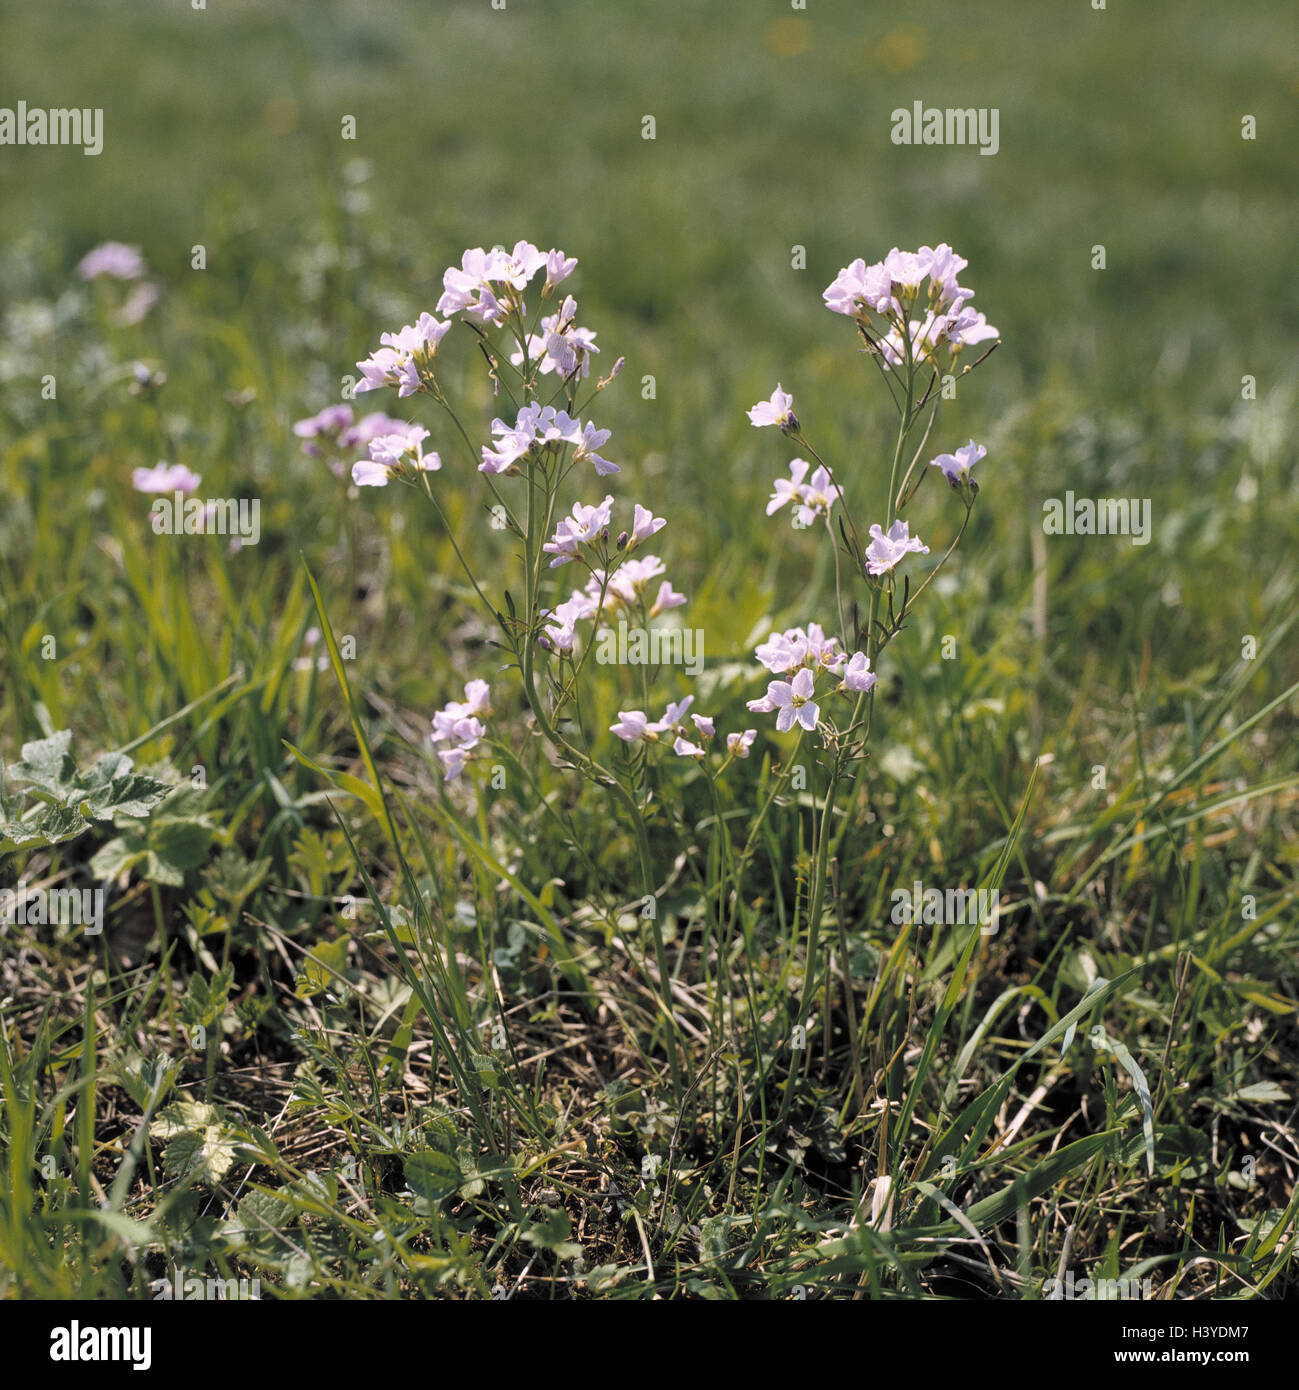 Lady's smock, Cardamine pratensis, flower of 2006, meadow, nature, botany, flora, meadow, spring flowers, flowers, plants, lady's smock, froth herb, spring, nature, blossom, season, Stock Photo